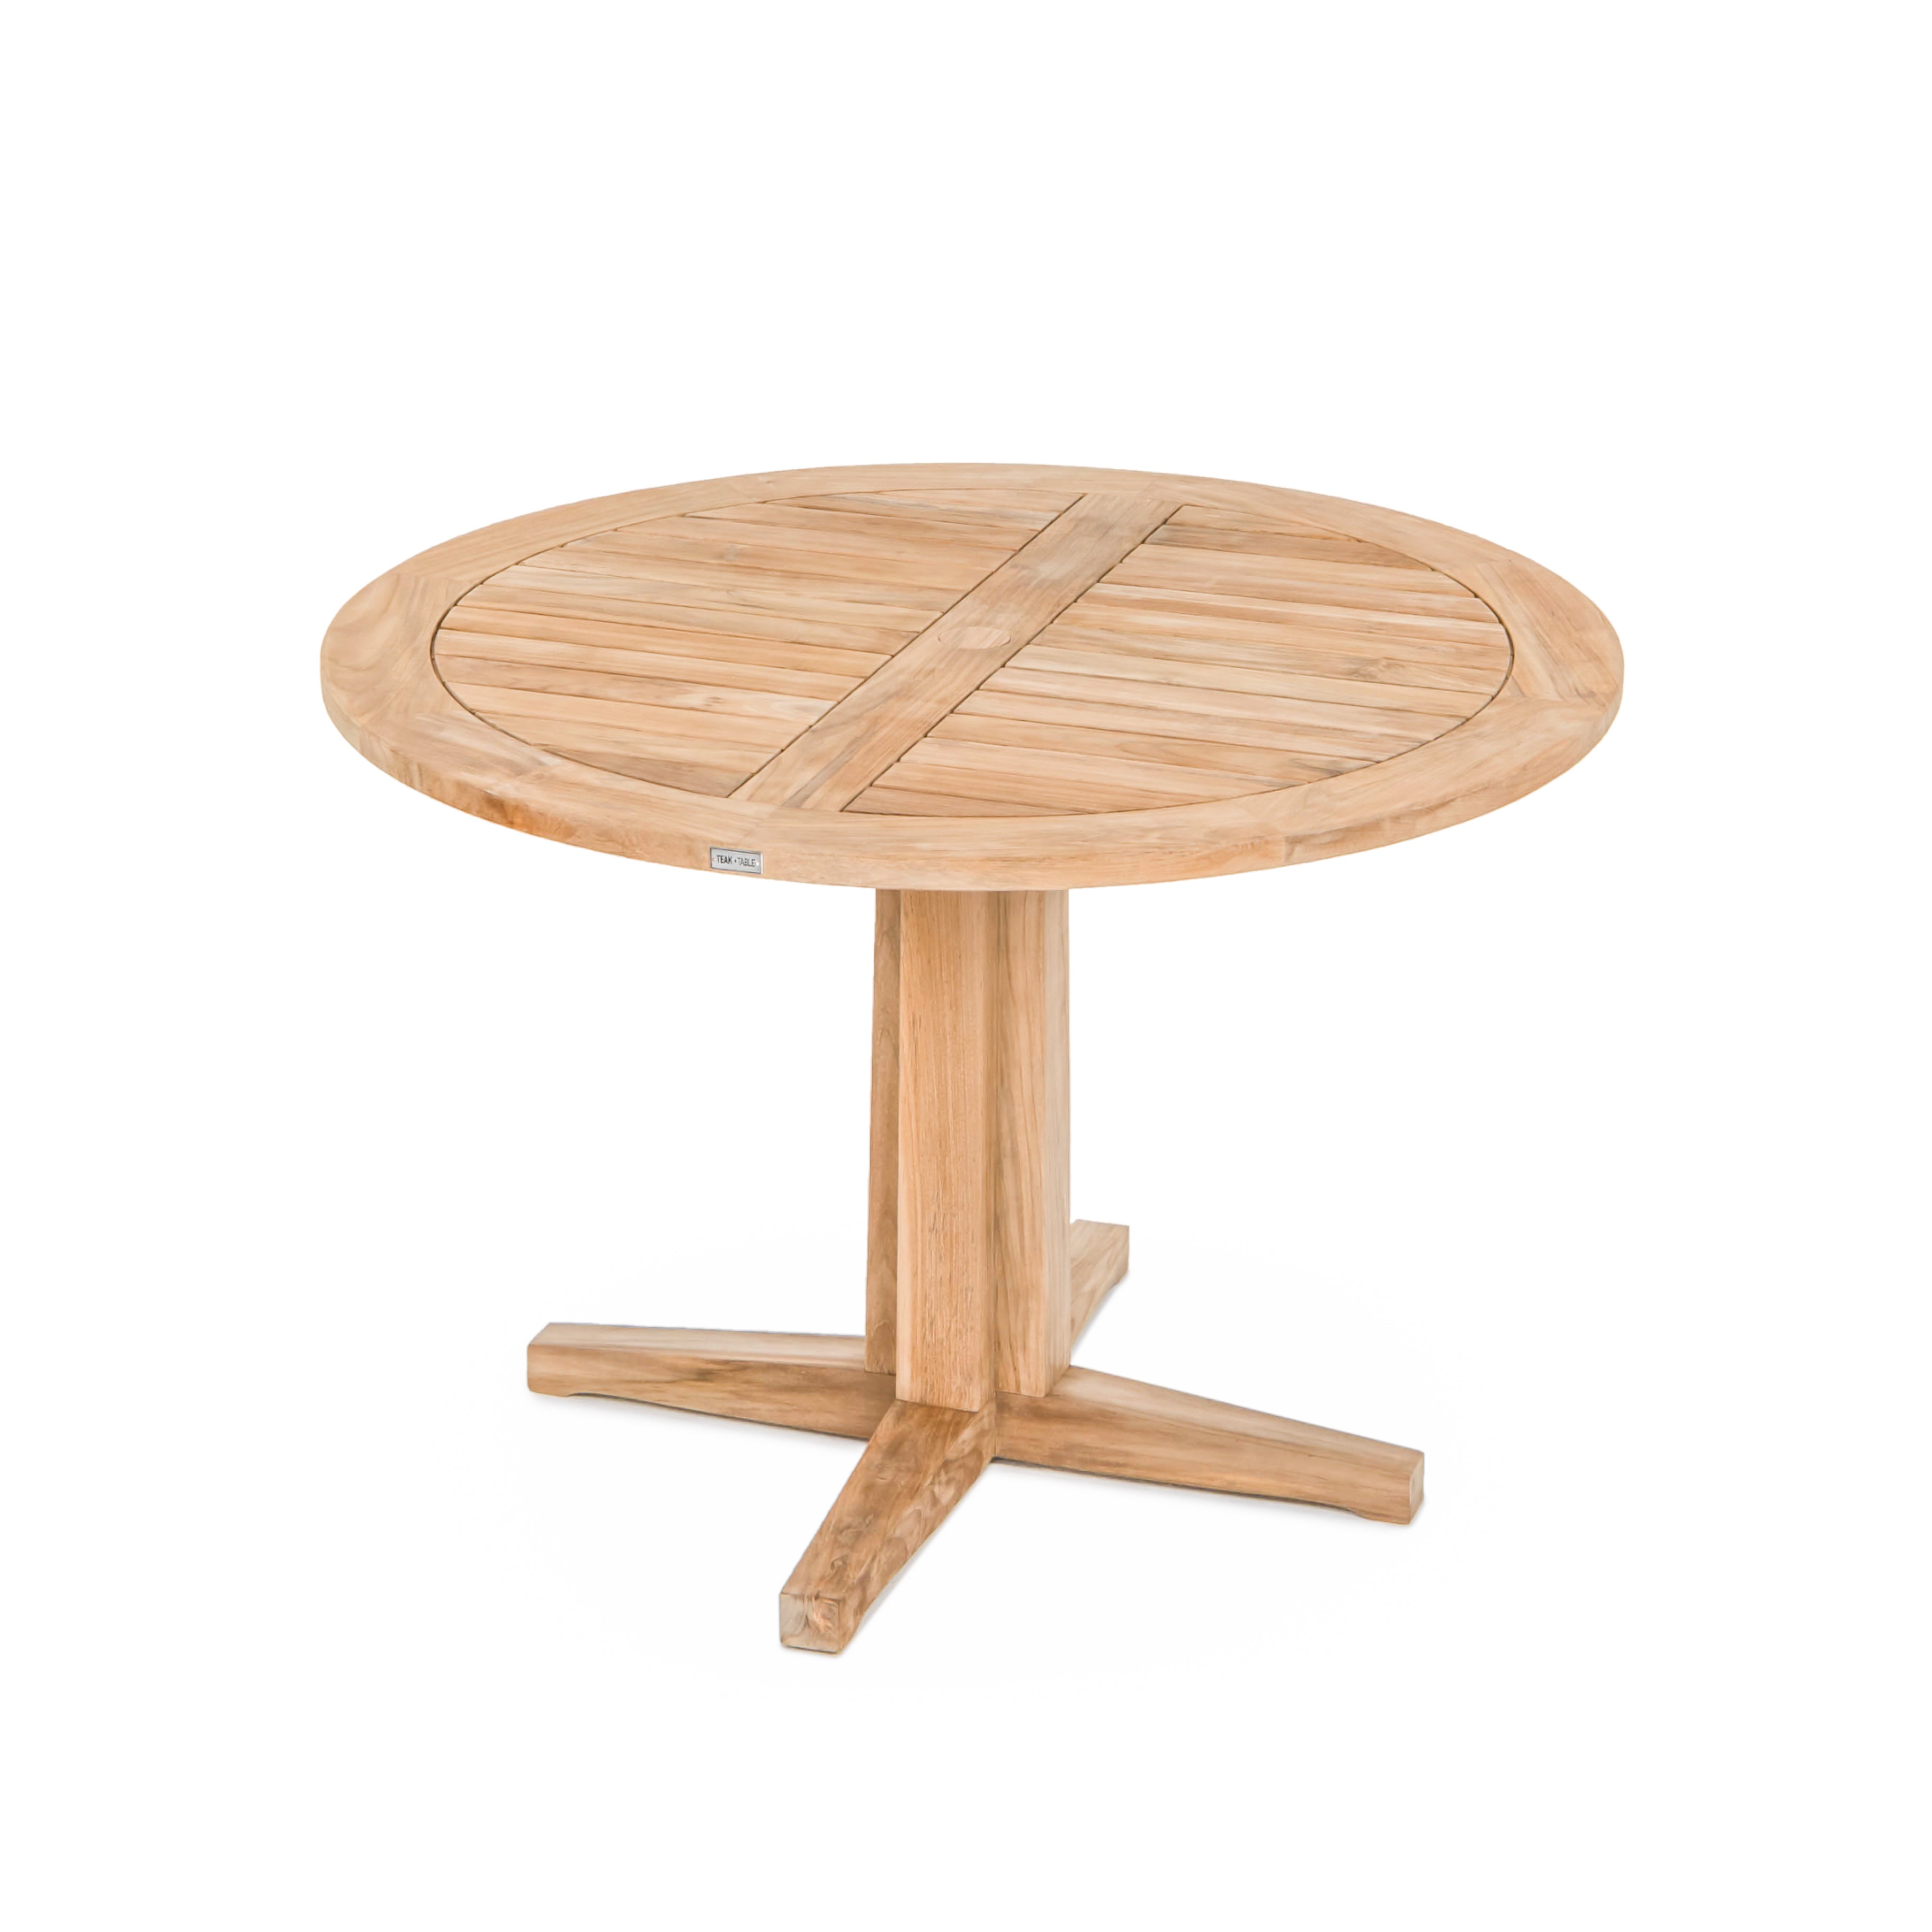 Friday Pedestal Table